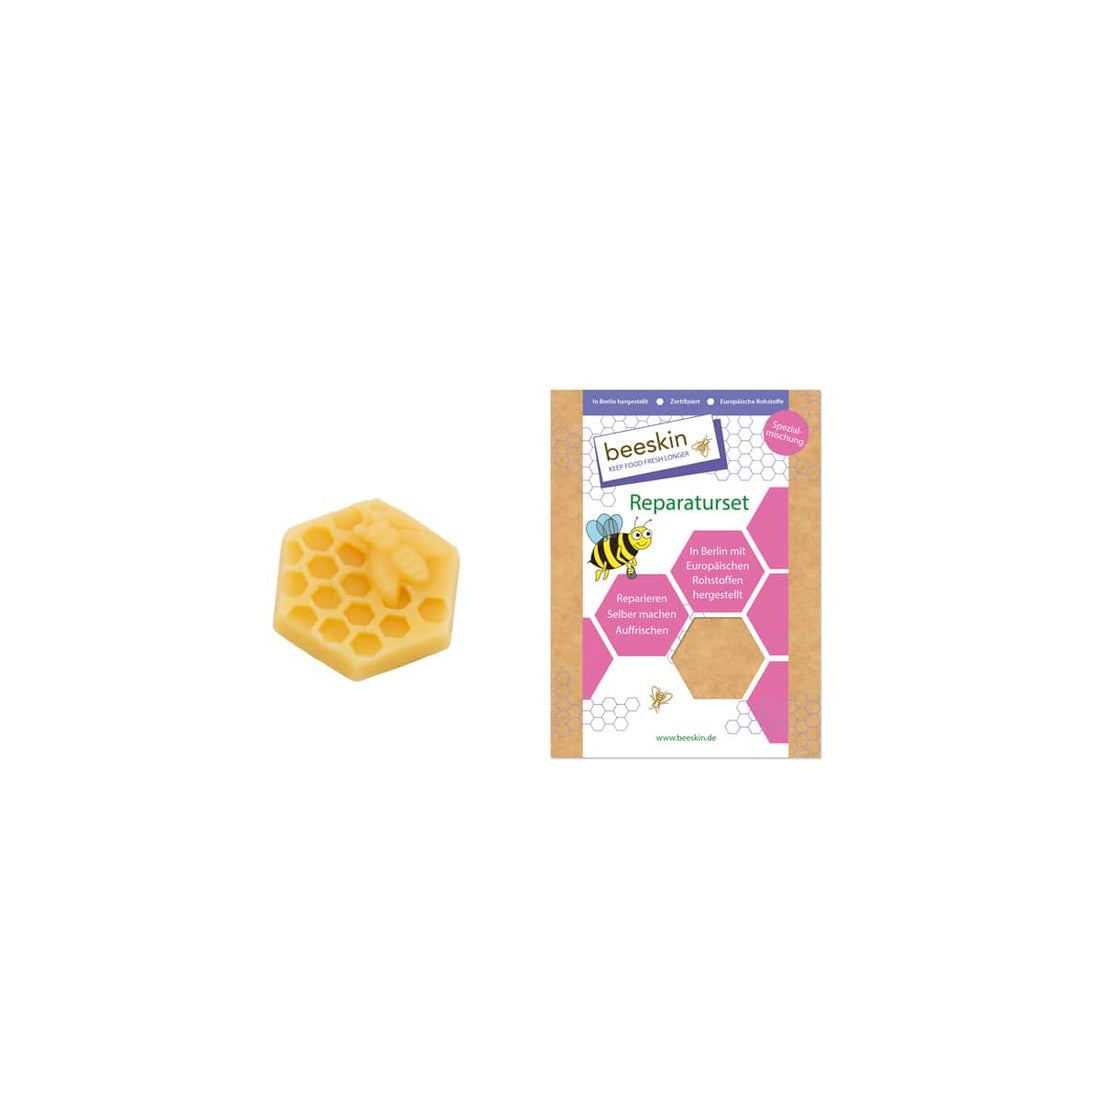 repair kit for beeswax wraps formed as a honeycomb next to packaging